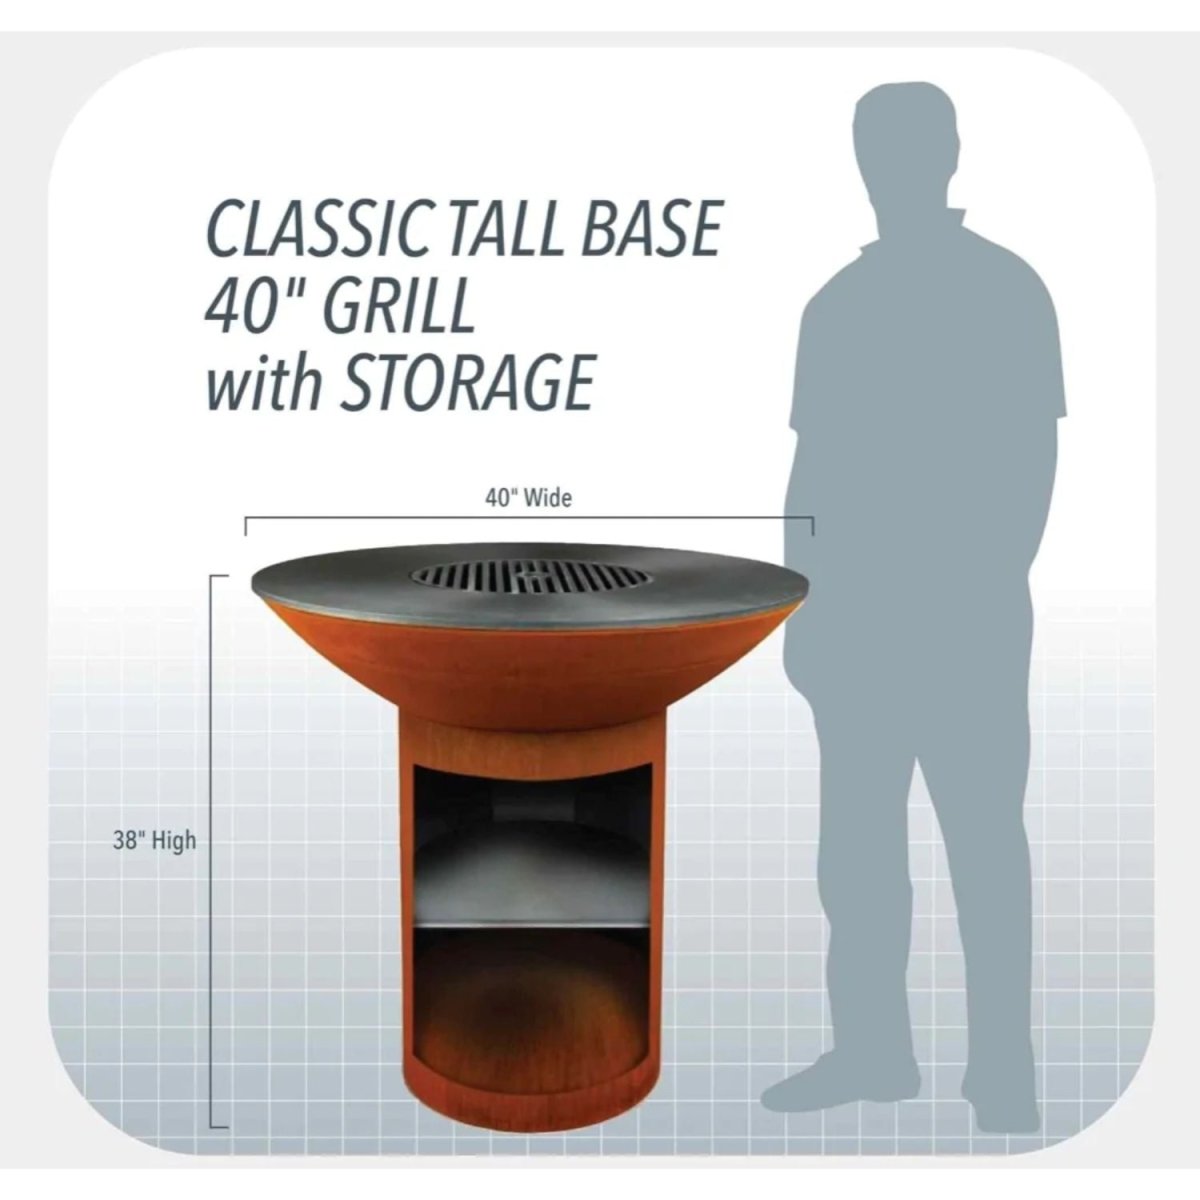 Arteflame Classic 40" Grill - Tall Round Base with Storage - Upper Livin